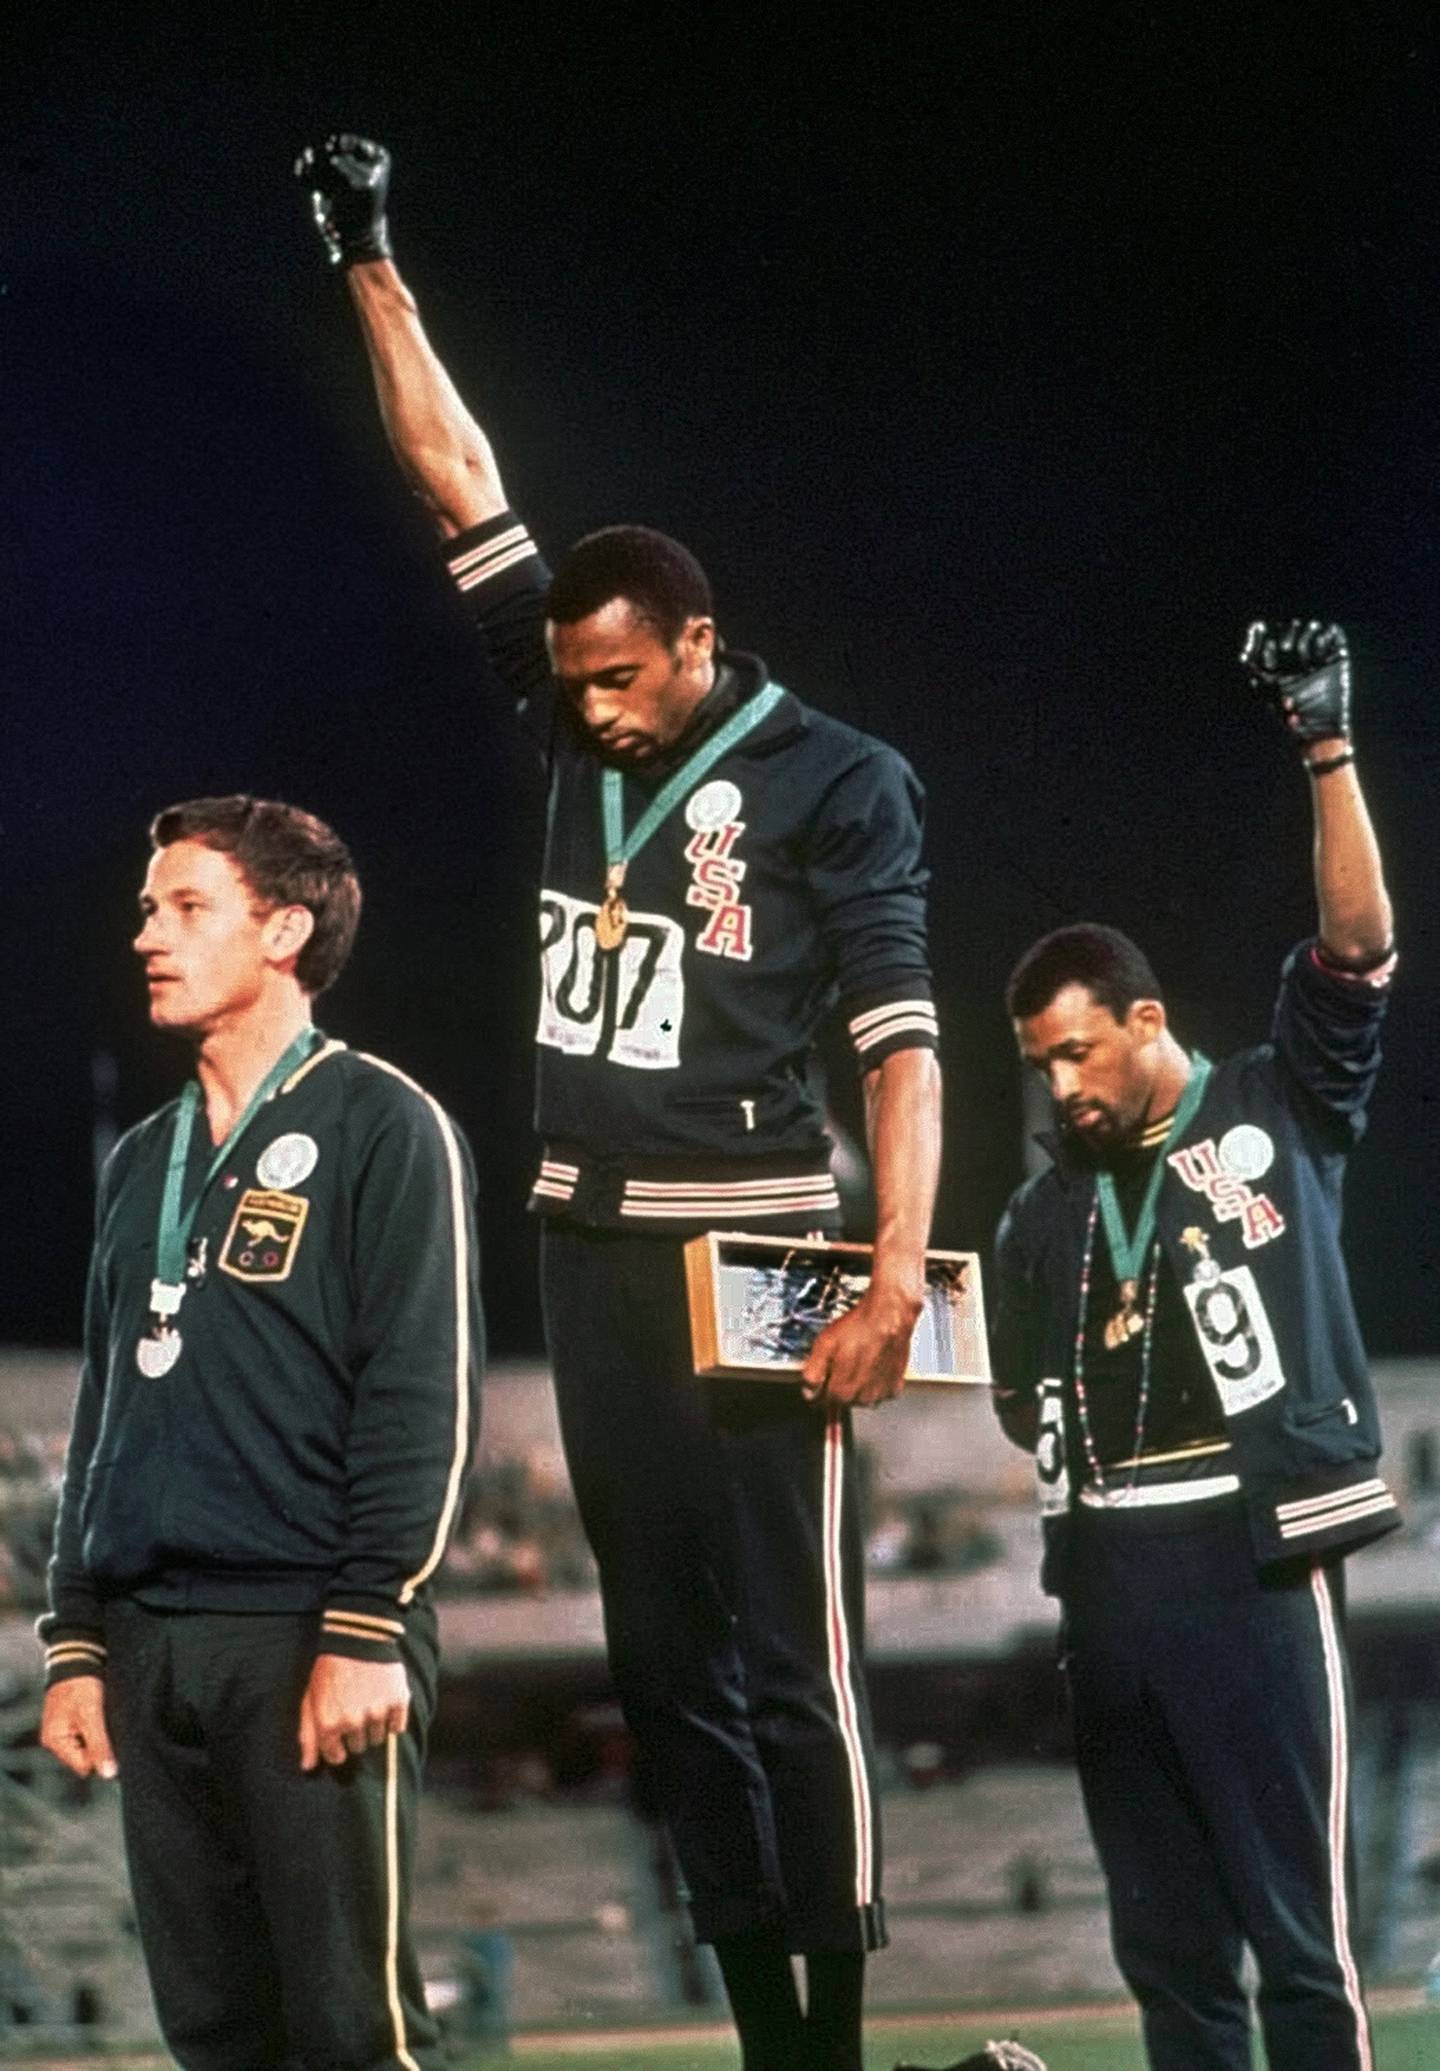 US athletes Tommie Smith, center, and John Carlos stare downward and extend gloved hands skyward in a Black power salute after Smith received the gold and Carlos the bronze for the 200 meter run at the Summer Olympic Games. Australian silver medalist Peter Norman is on the left, October 16, 1968, in Mexico City. AP